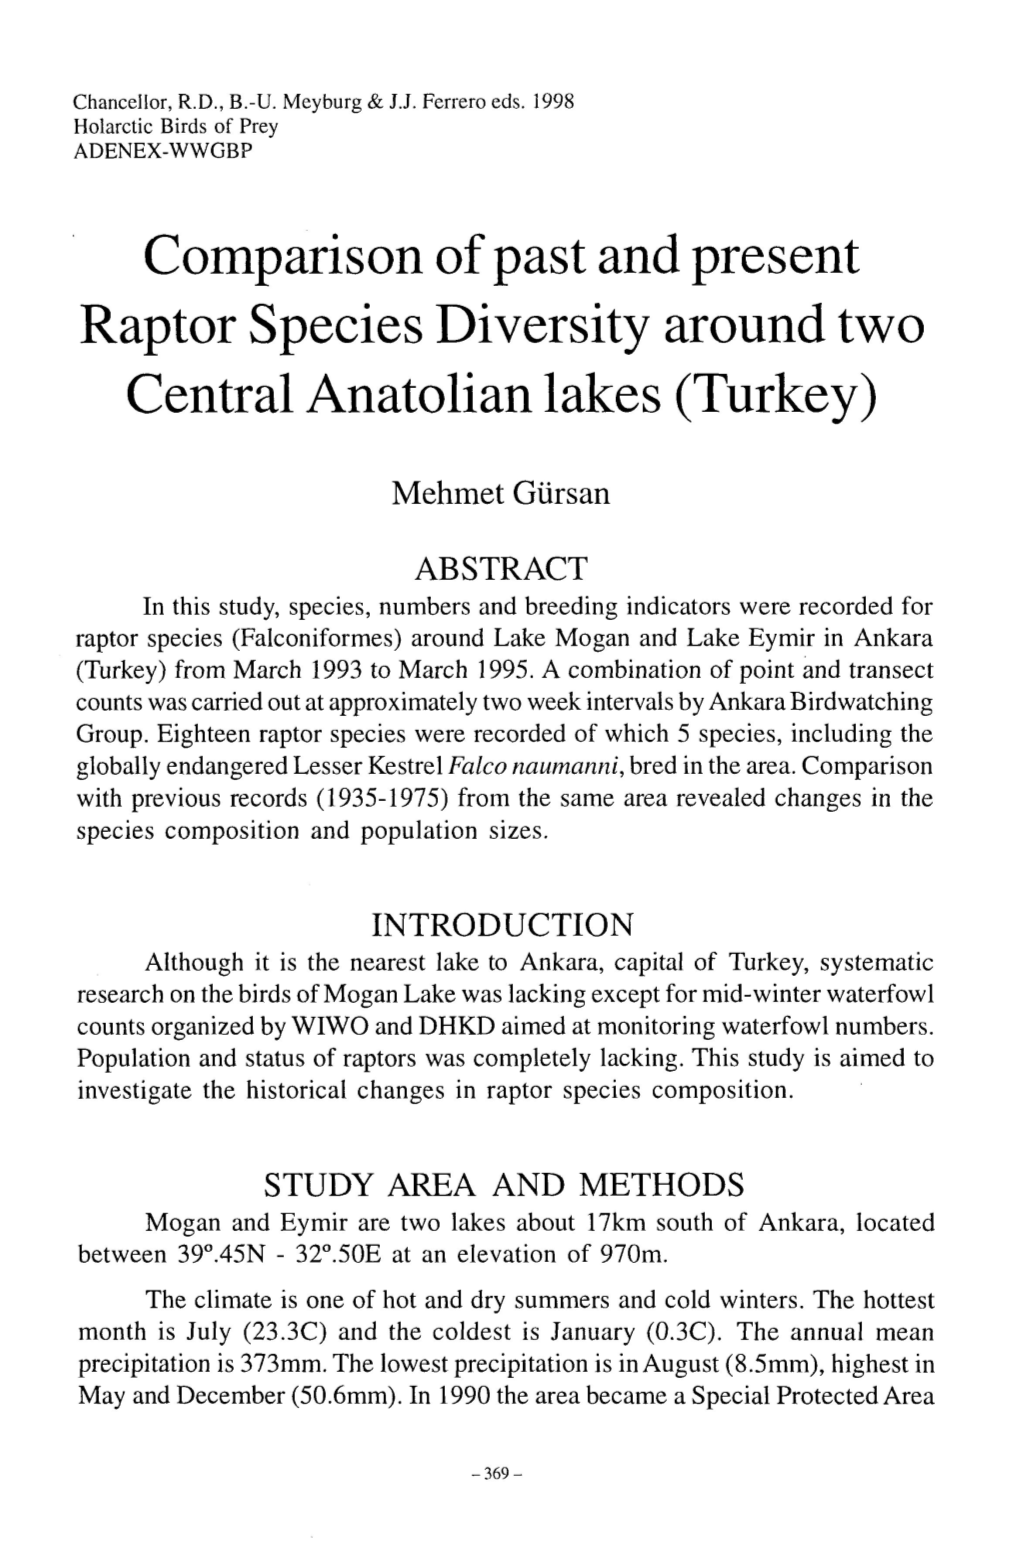 Comparison of Past and Present Raptor Species Diversity Around Two Central Anatolian Lakes (Turkey)